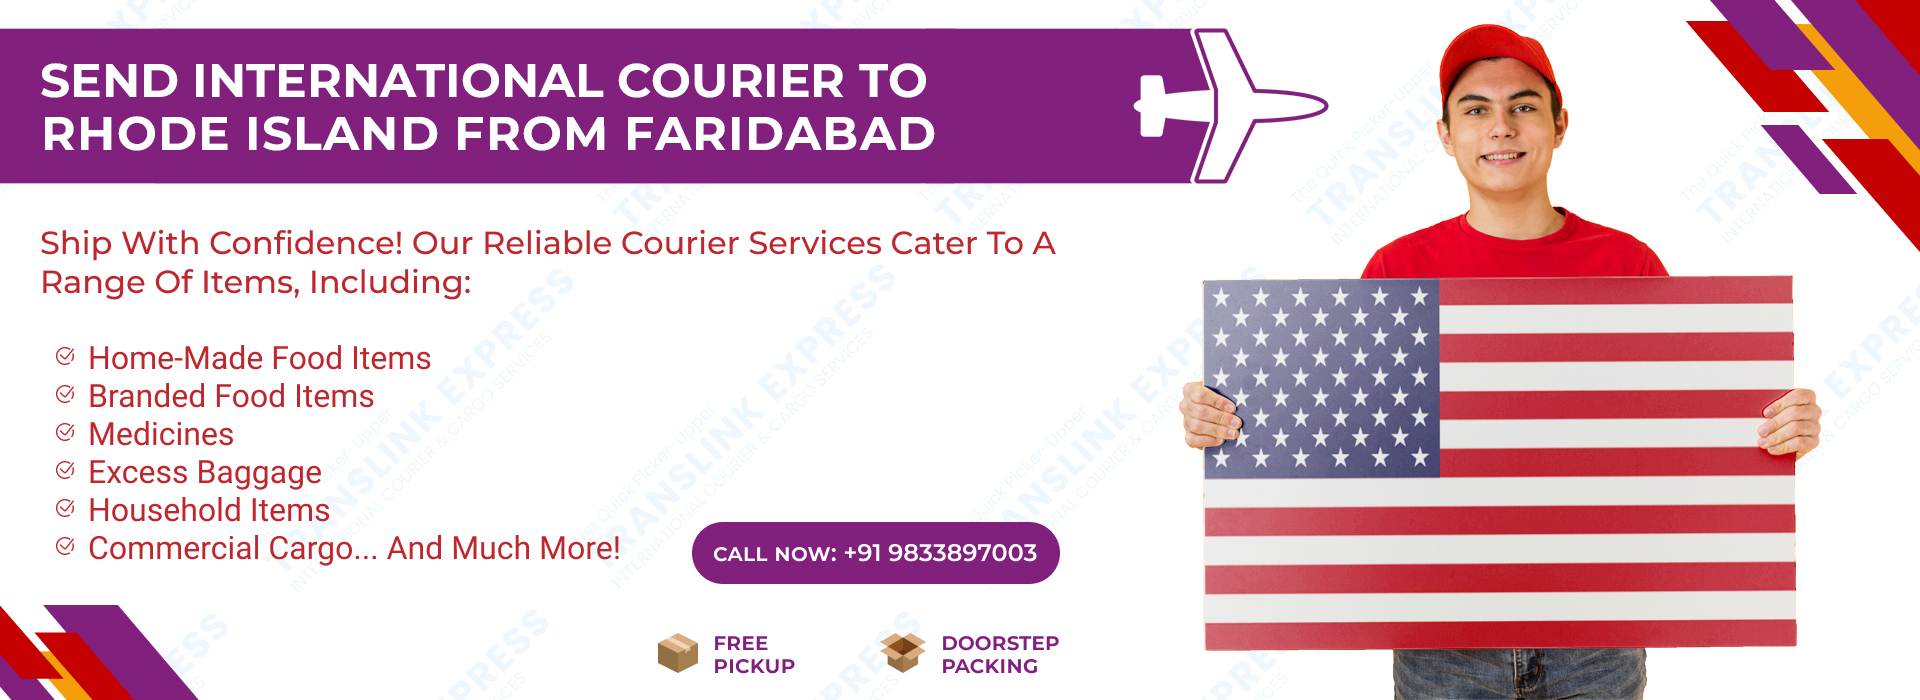 Courier to Rhode Island From Faridabad